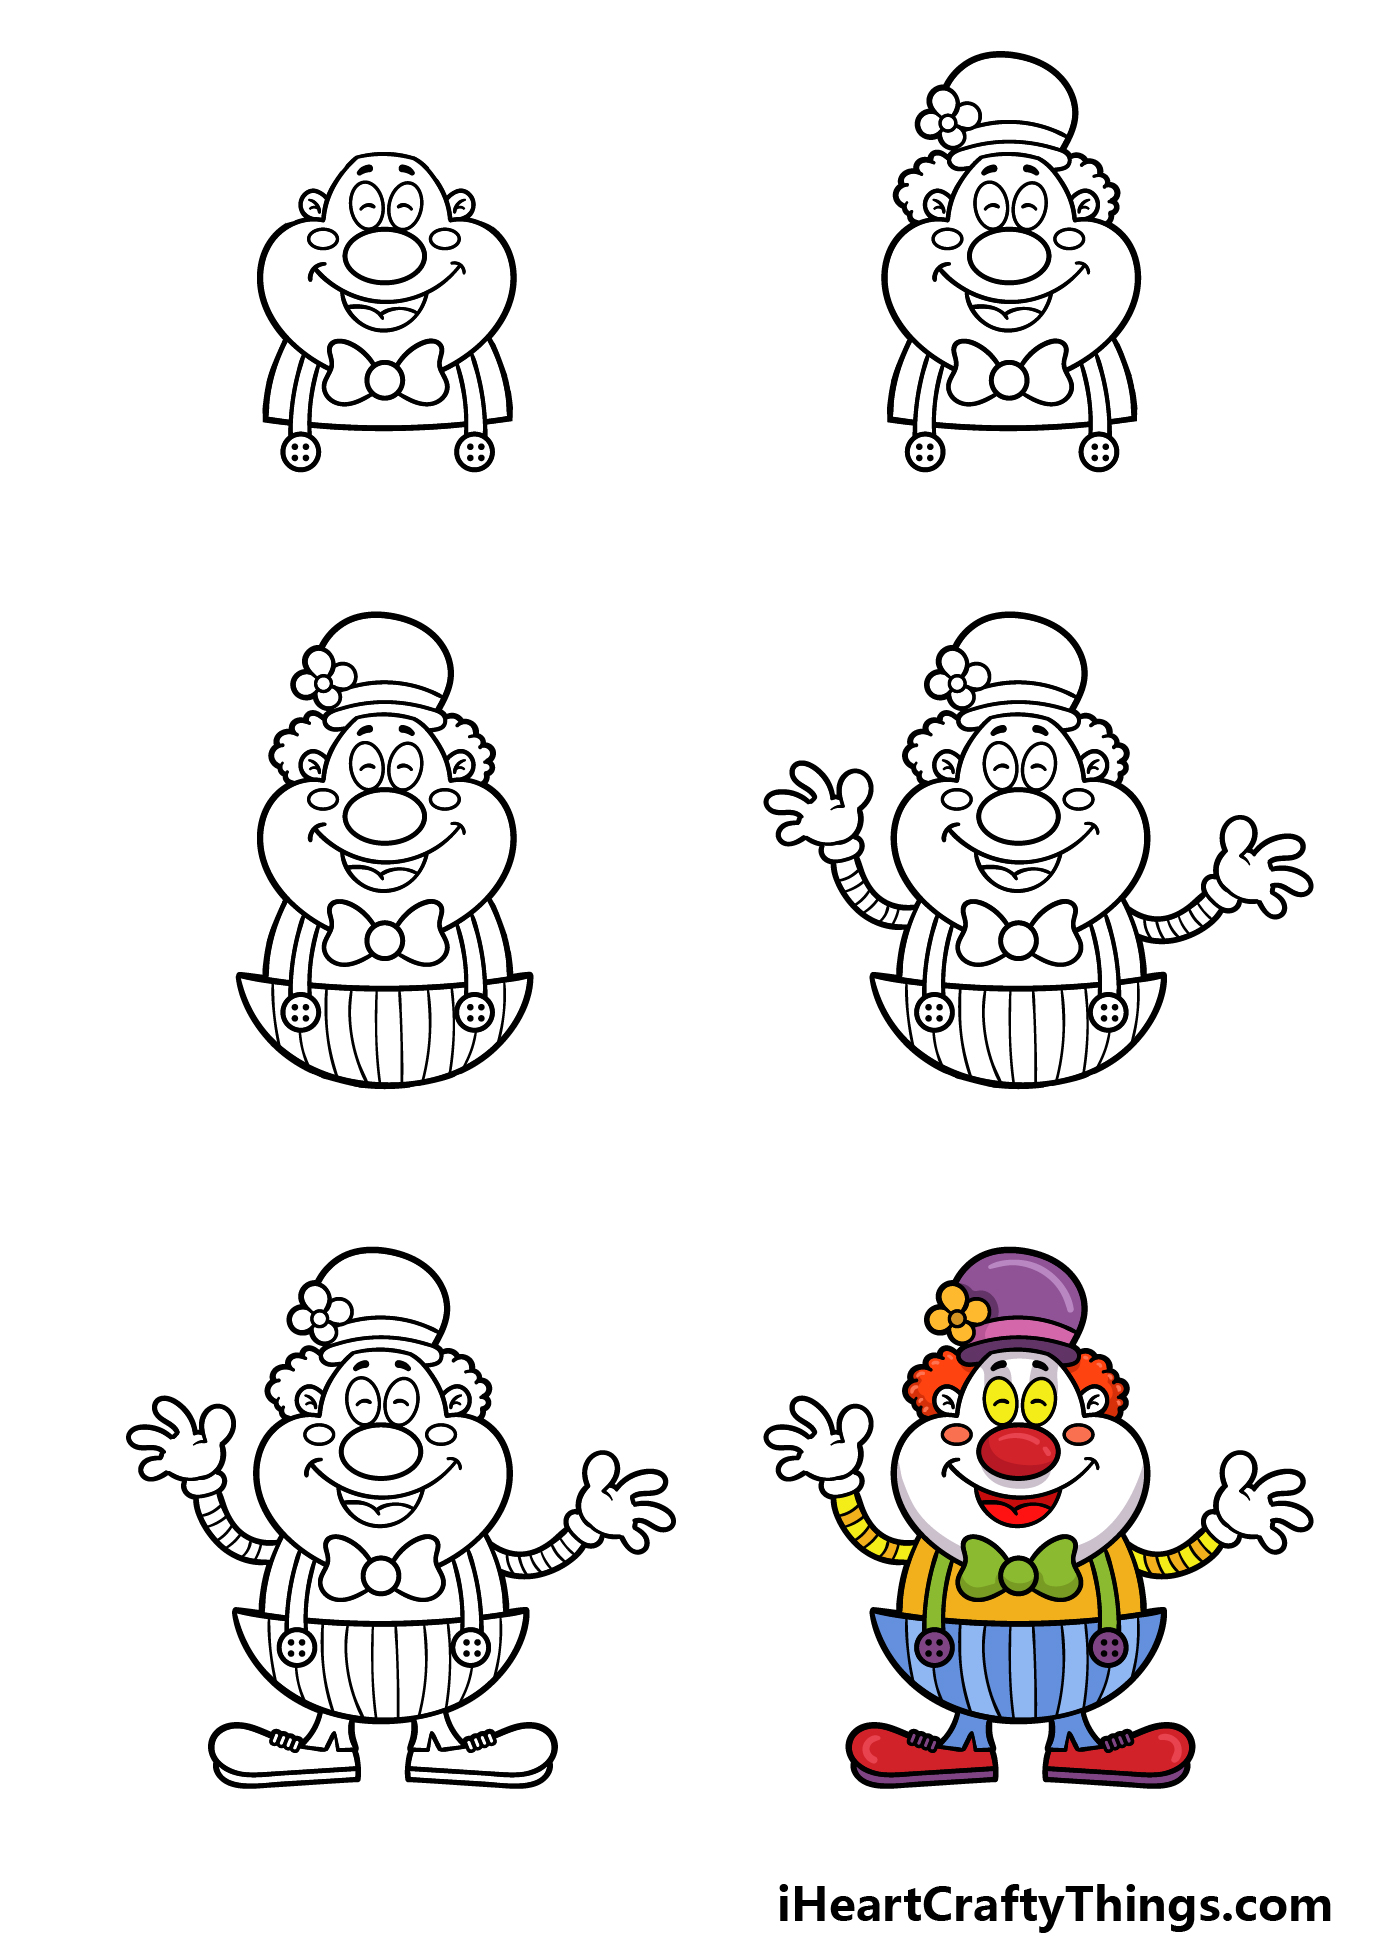 how to draw a cartoon clown in 6 steps